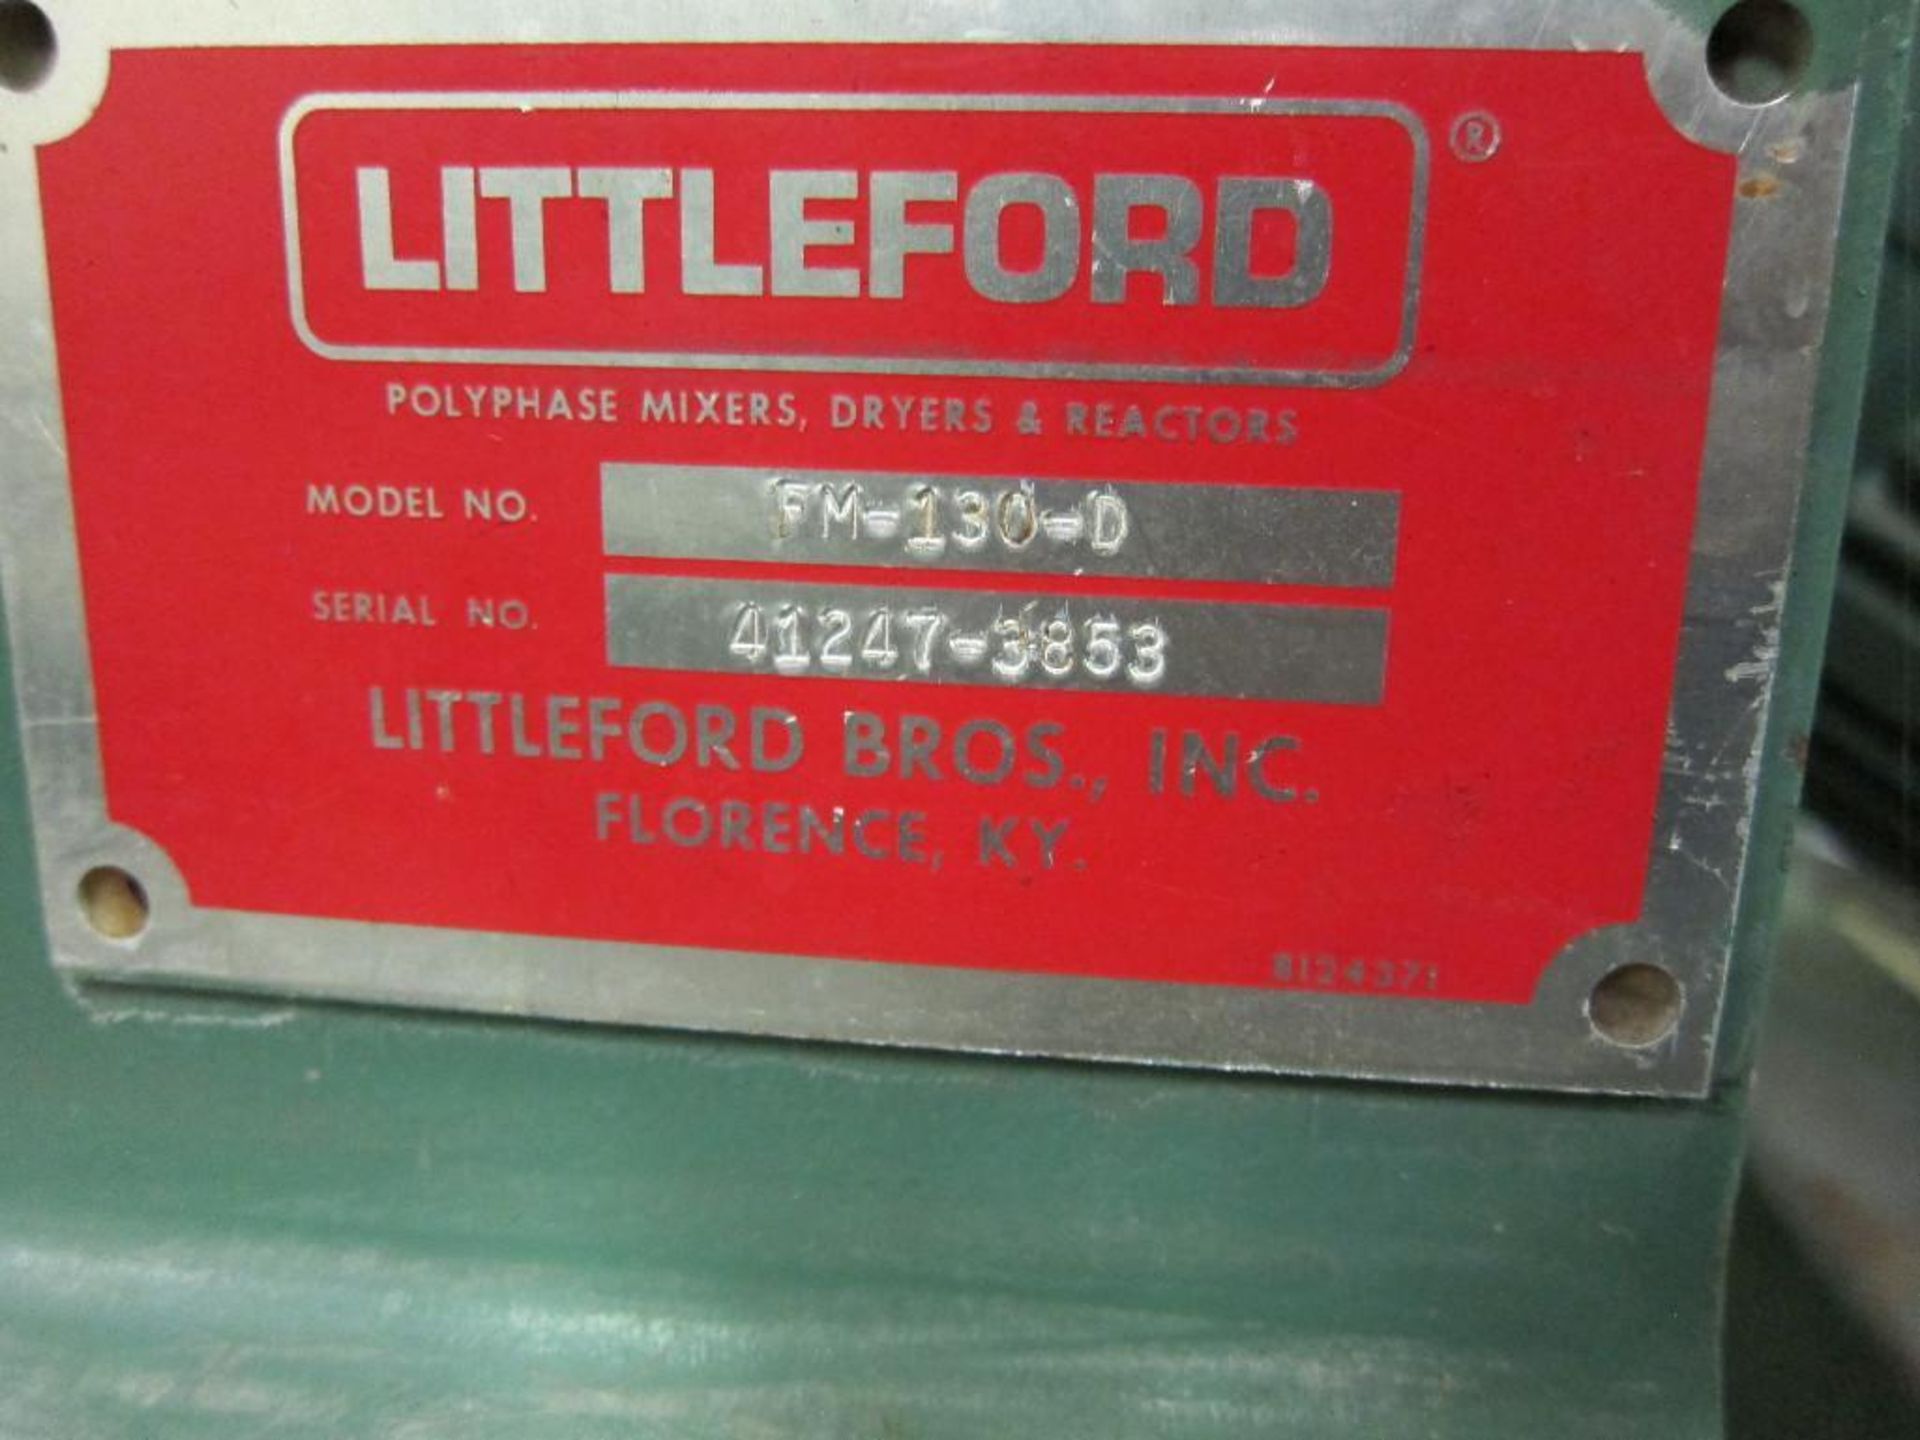 Littleford Day 130 Liter Stainless Steel High Intensity Mixer - Image 8 of 13